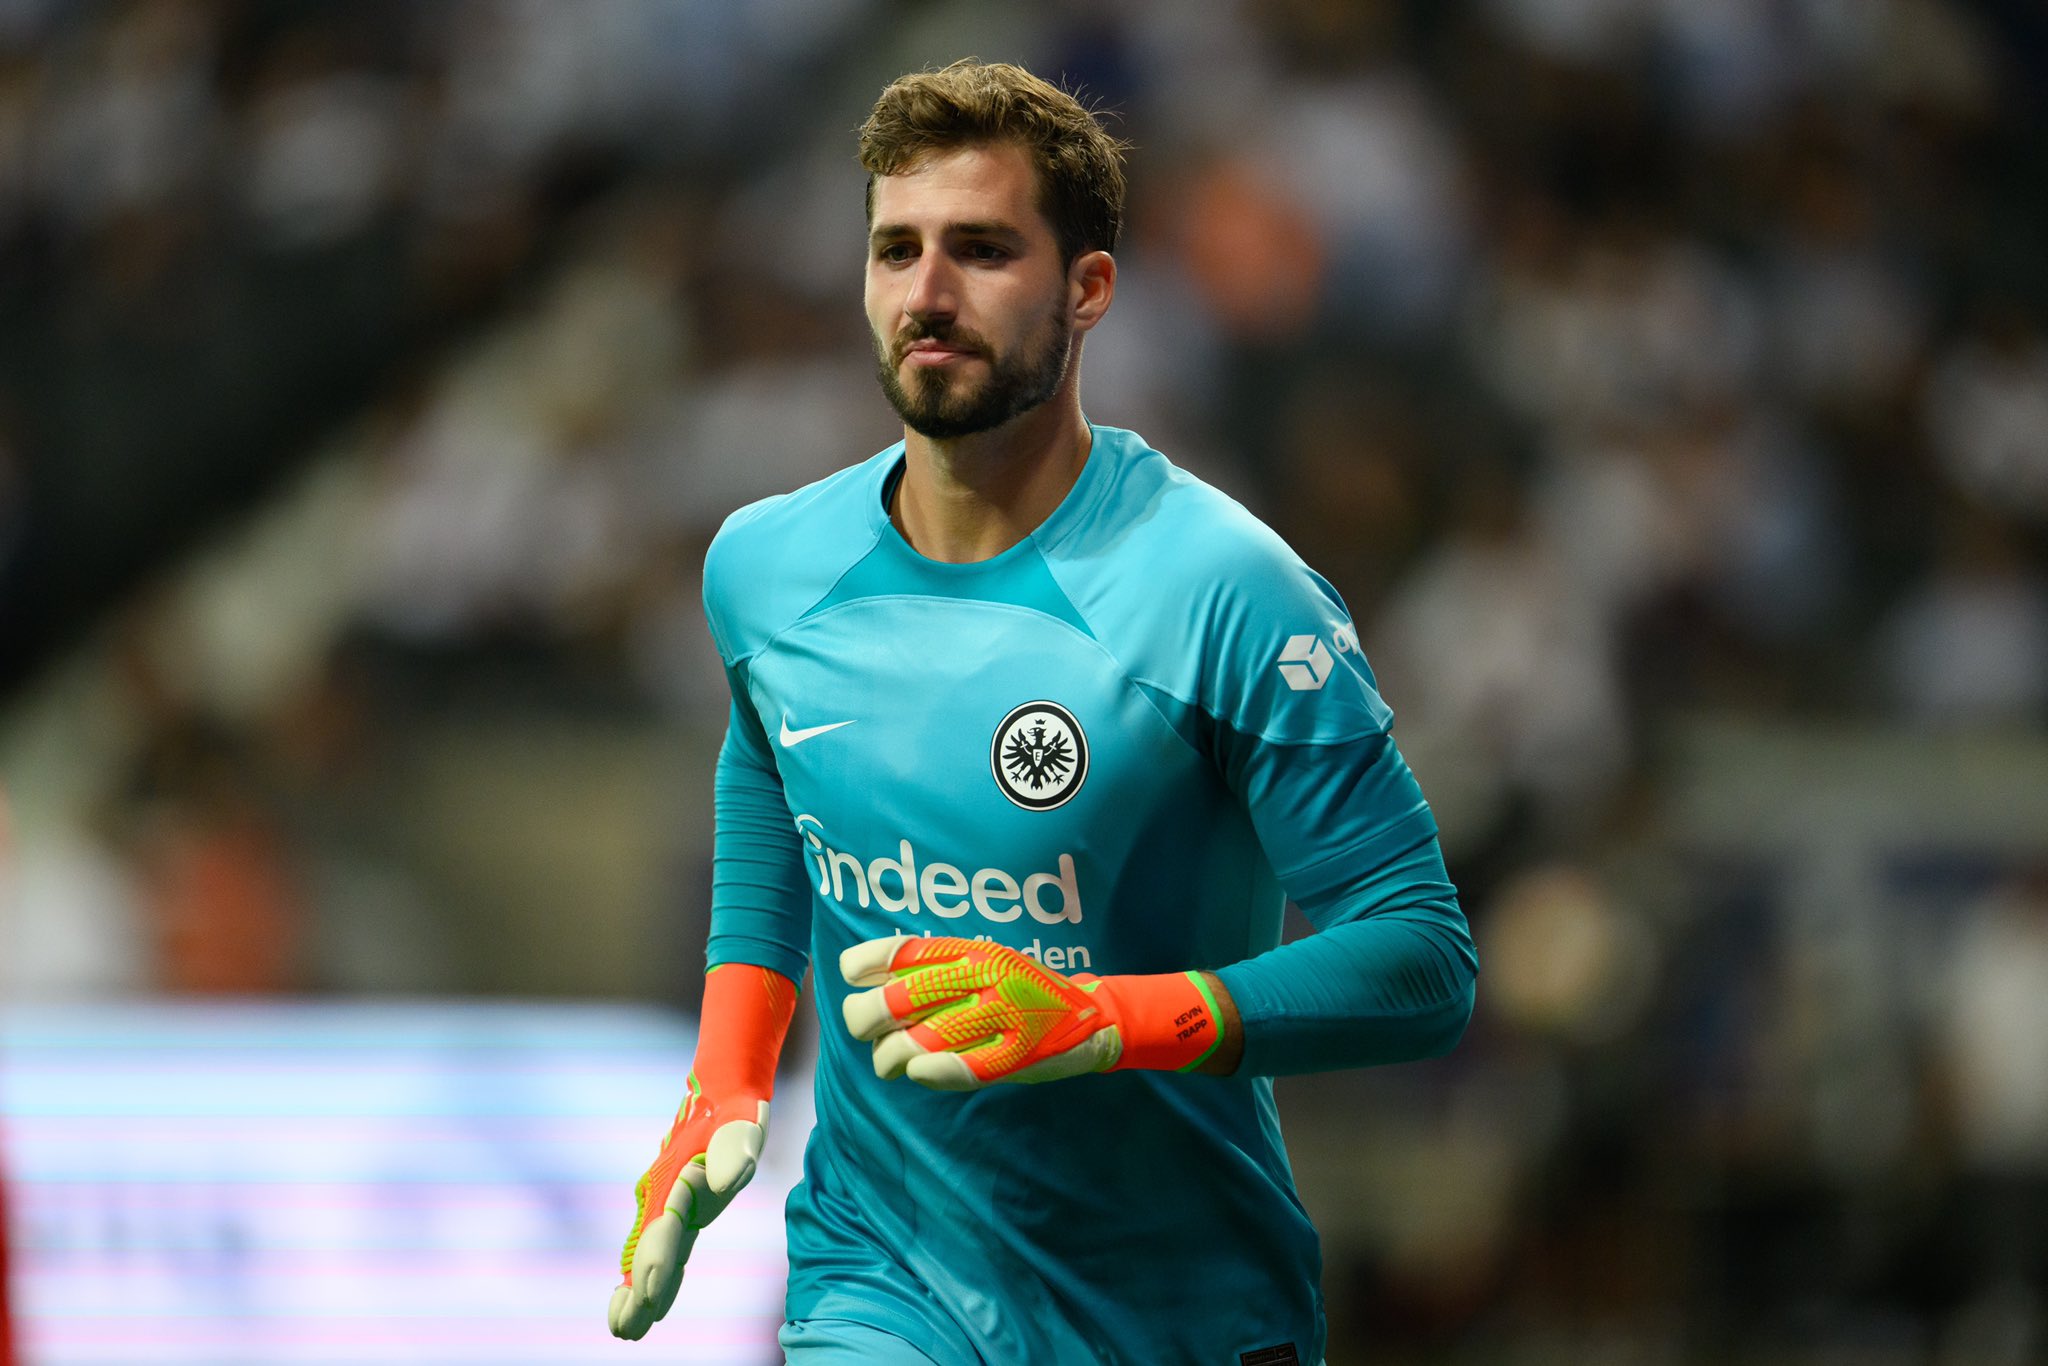 There was official offer but I have decided to stay with Eintracht Frankfurt, reveals Kevin Trapp